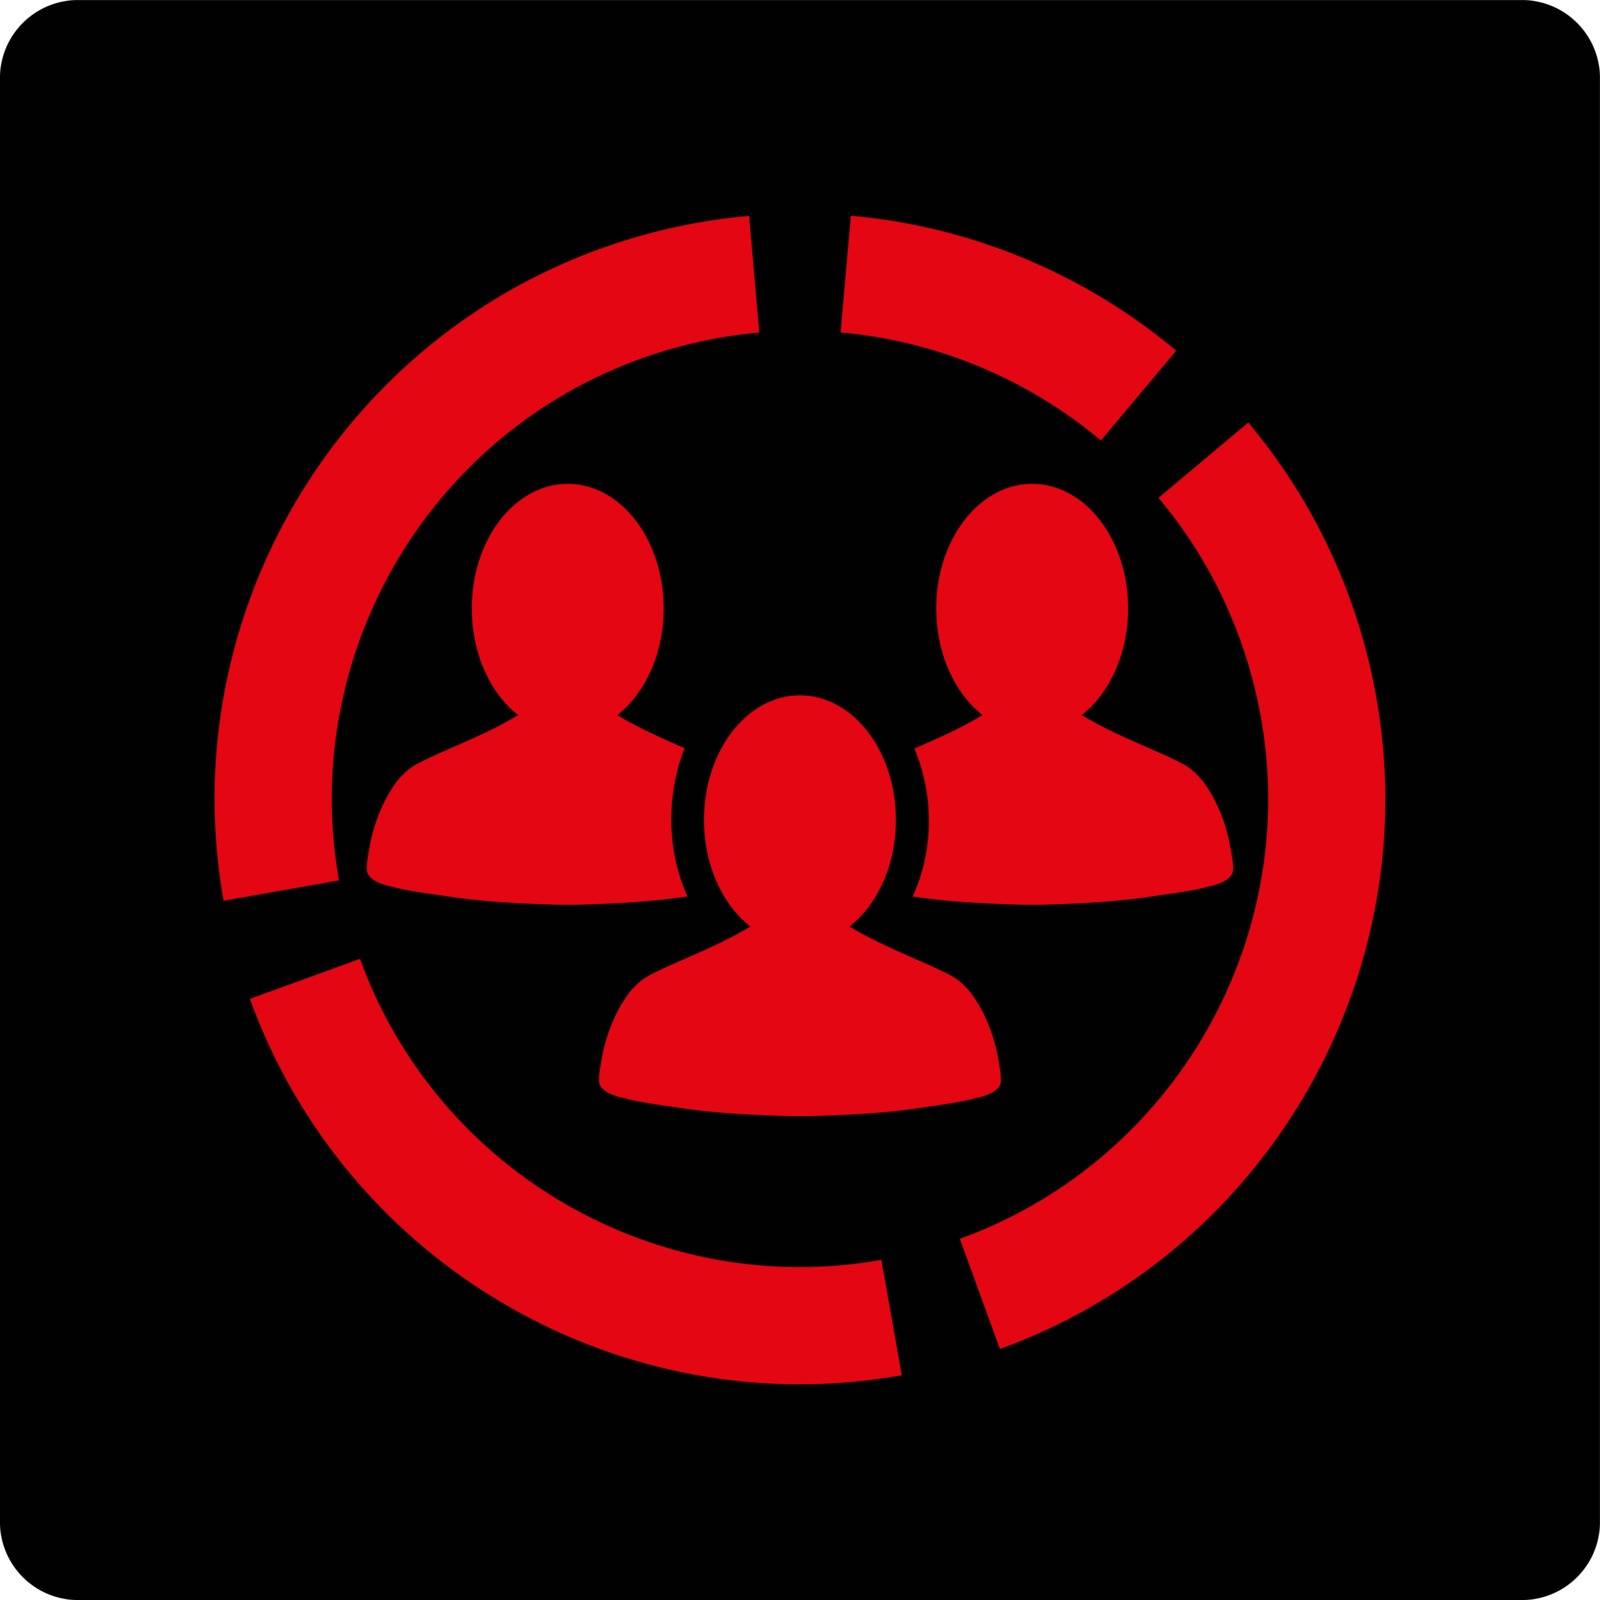 Demography diagram icon. Vector style is intensive red and black colors, flat rounded square button on a white background.